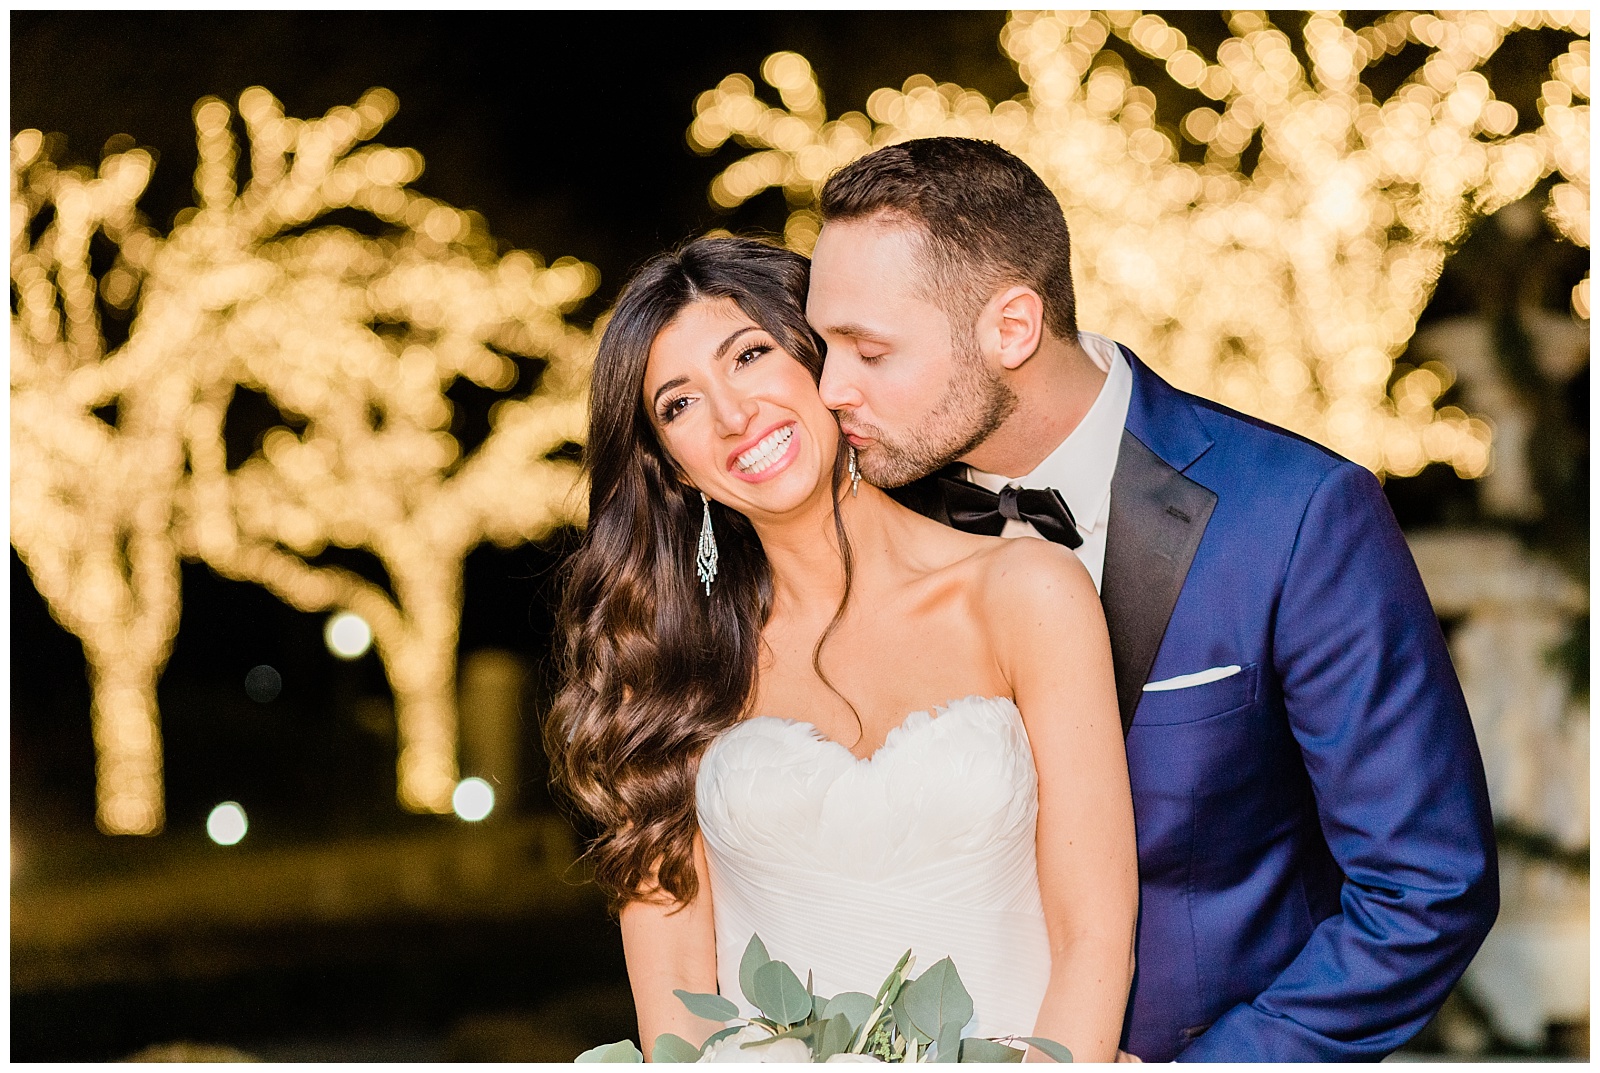 Park Chateau Wedding, Photographer, New Jersey, NJ, Winter, Bride and Groom Portraits, Nighttime, Outdoor, Bokeh, Lights, Festive, Laughter